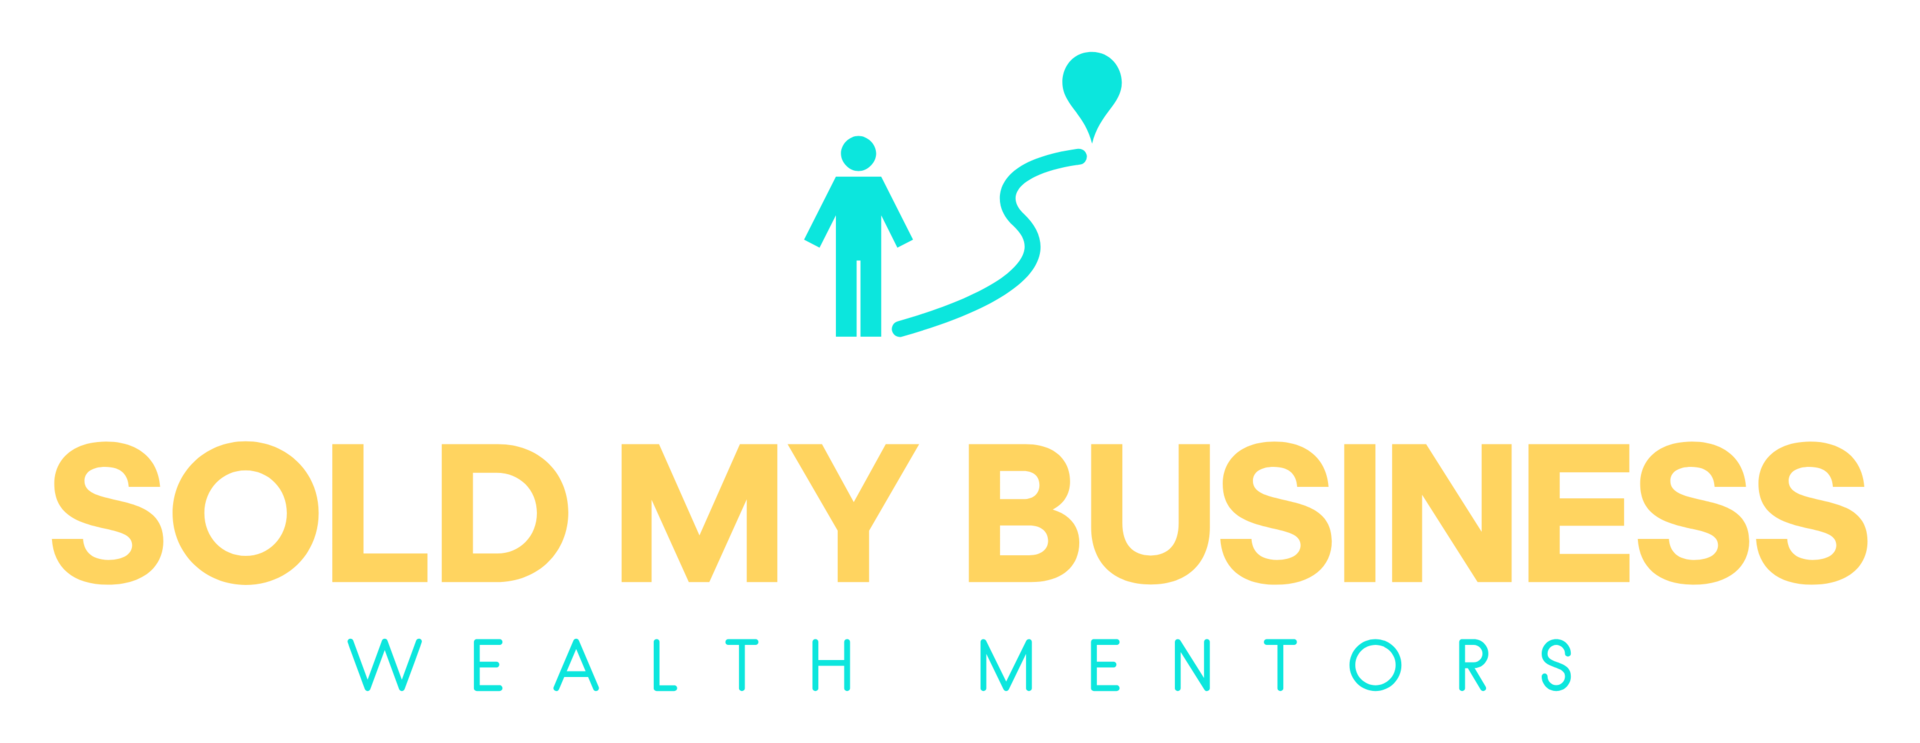 Sold My Business - Wealth Mentor